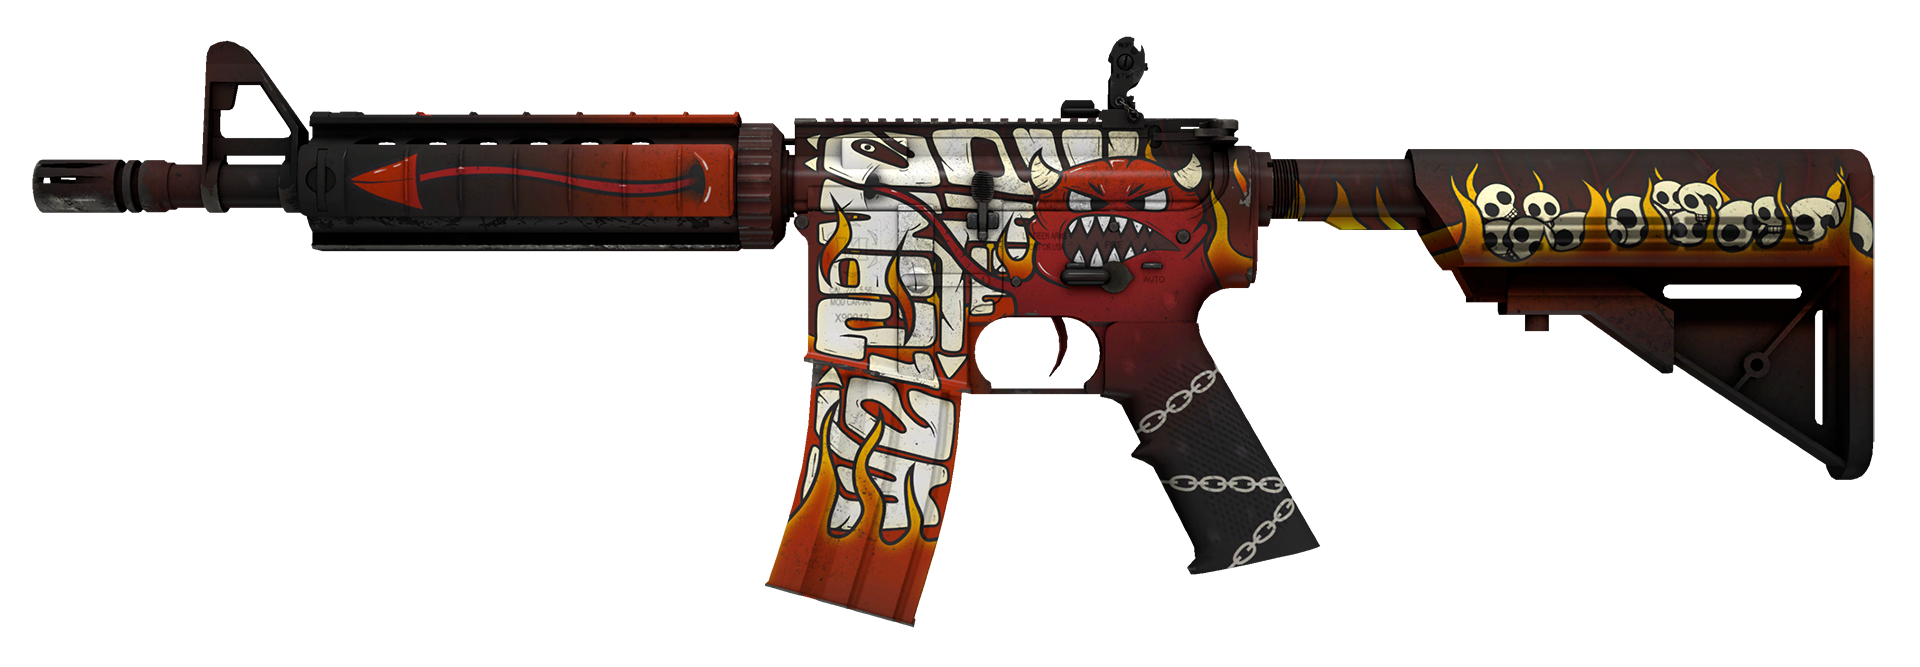 M4A4 Hellfire Large Rendering